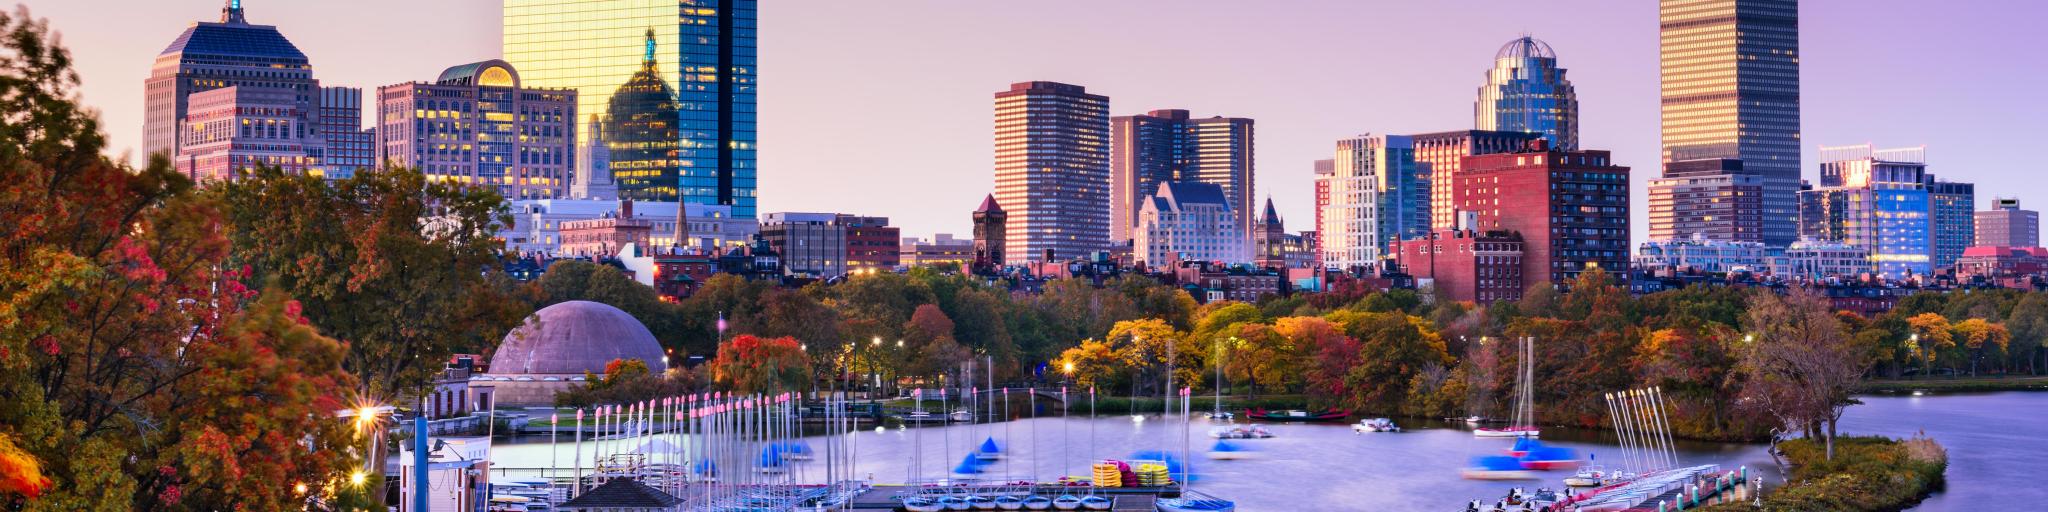 Boston, Massachusetts, USA skyline with water in the foreground at dusk.